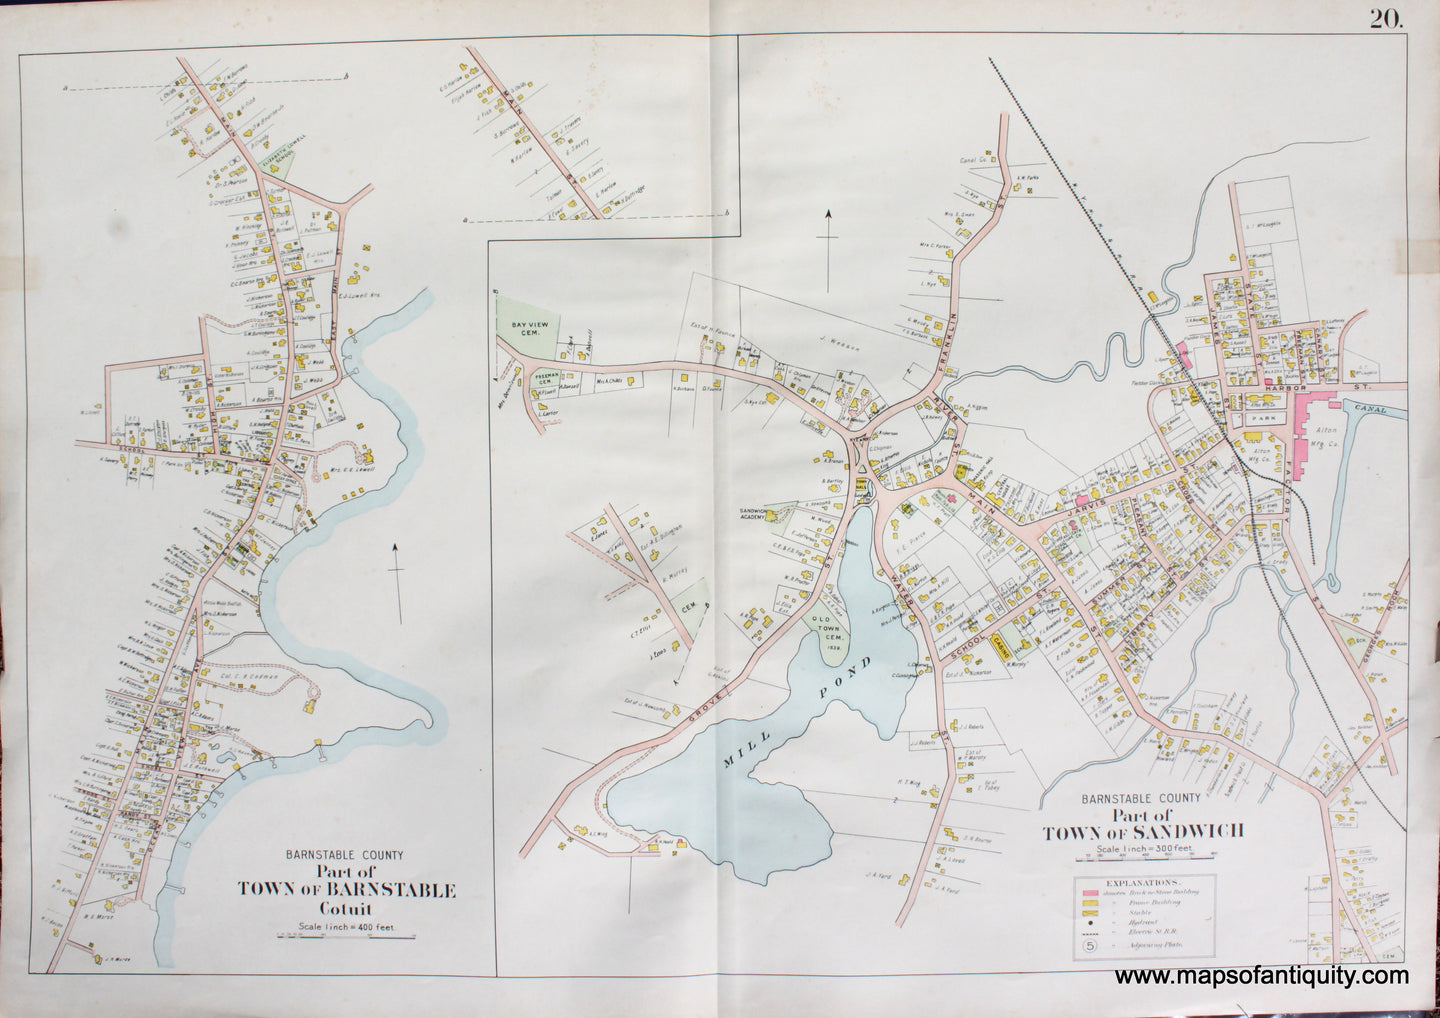 Antique-Hand-Colored-Map-Cotuit-(Part-of-the-Town-of-Barnstable)-Part-of-the-Town-of-Sandwich-Page-20-(MA)-Massachusetts-Cape-Cod-and-Islands-1906-Walker-Maps-Of-Antiquity